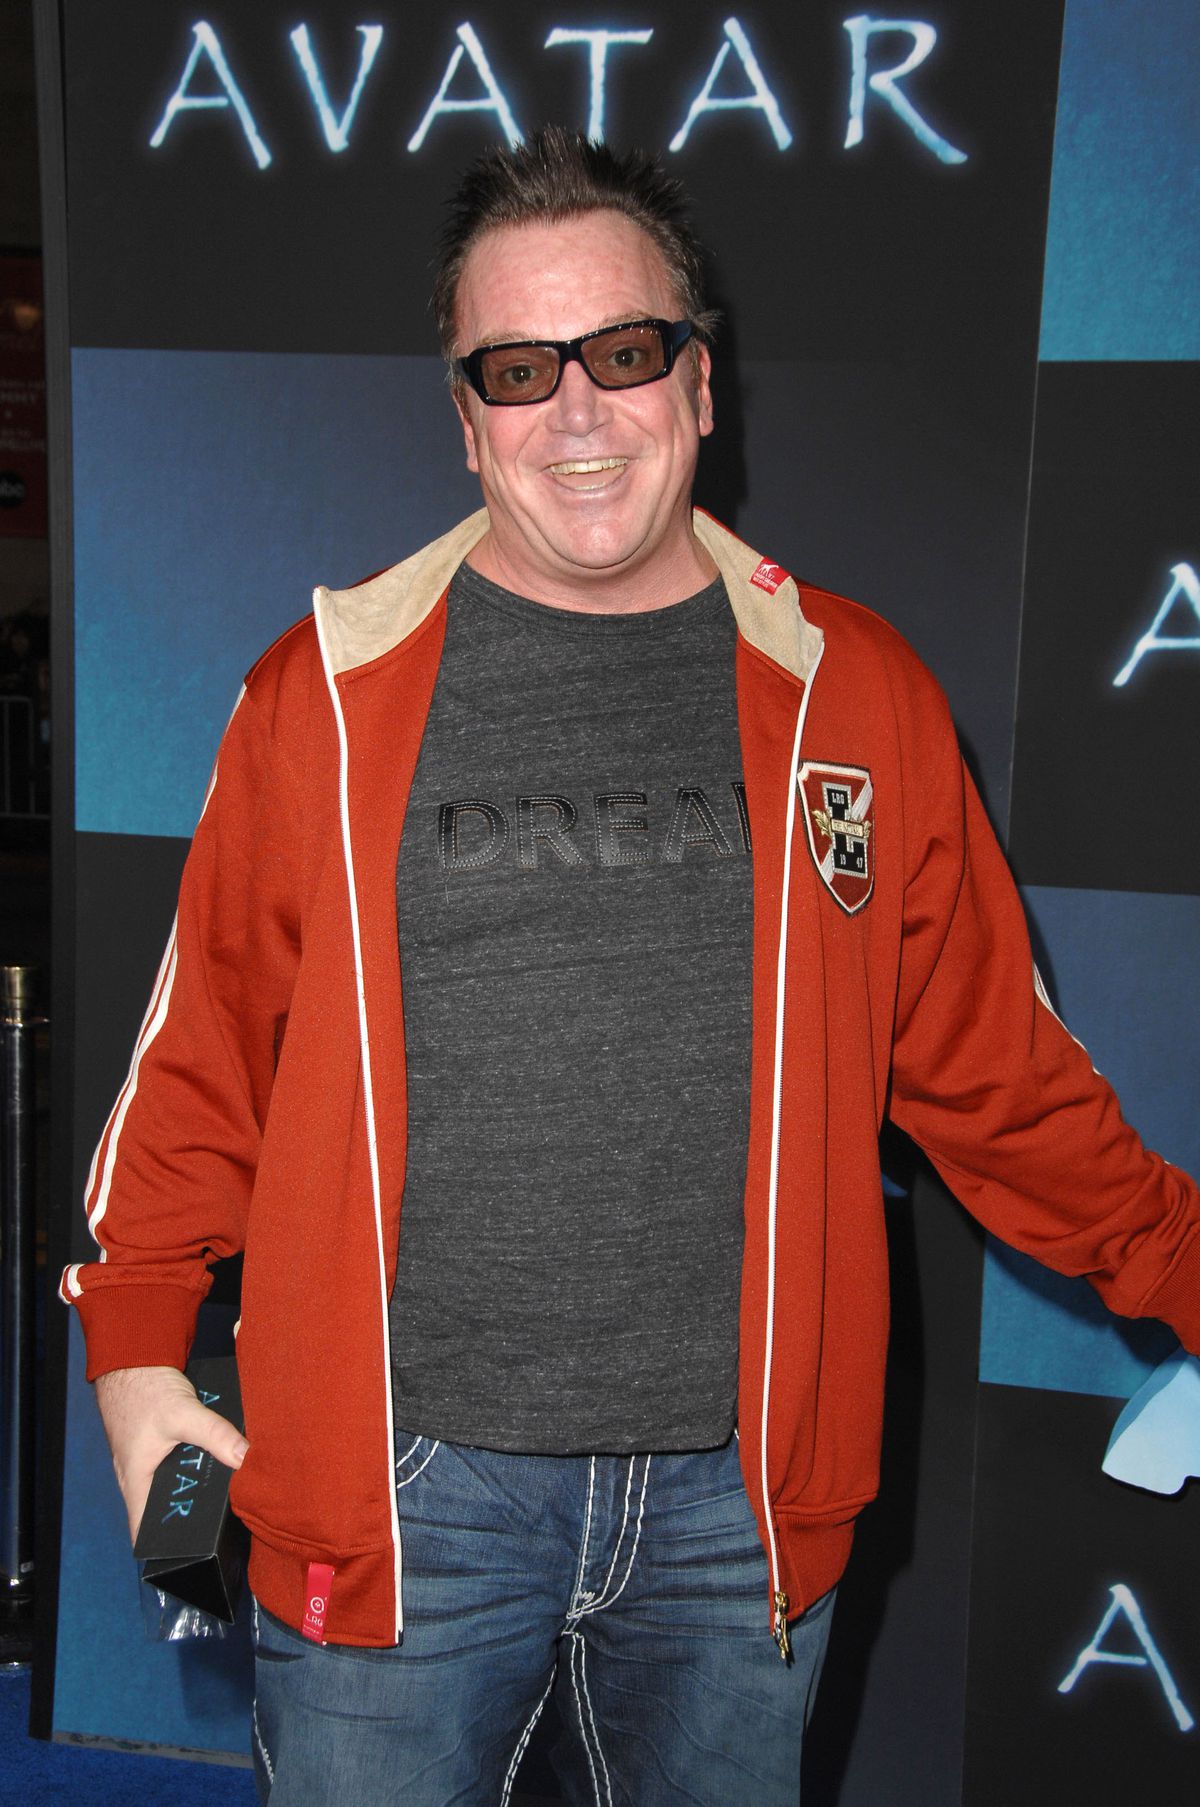 Tom Arnold in a bright red coat and 3D glasses really showed up with a smile at the Avatar premiere